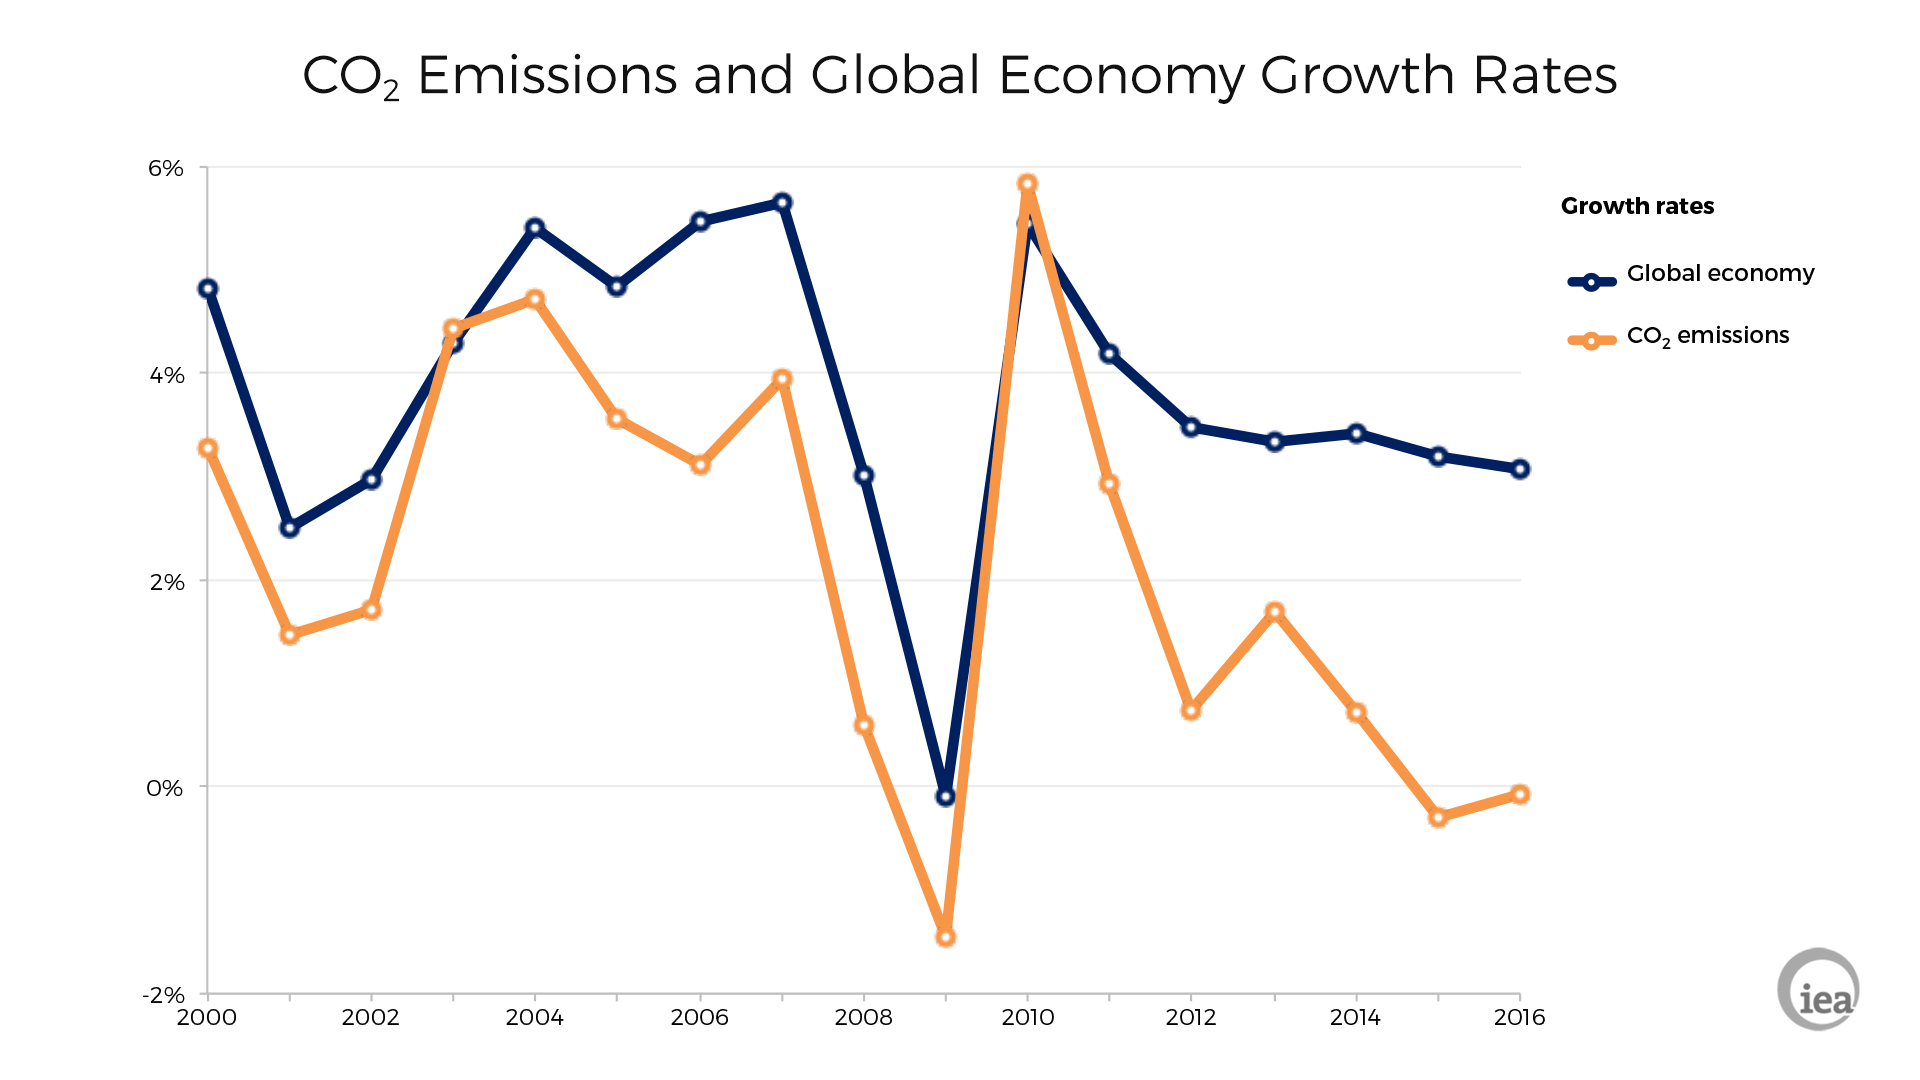 CO2 emissions and GDP growth